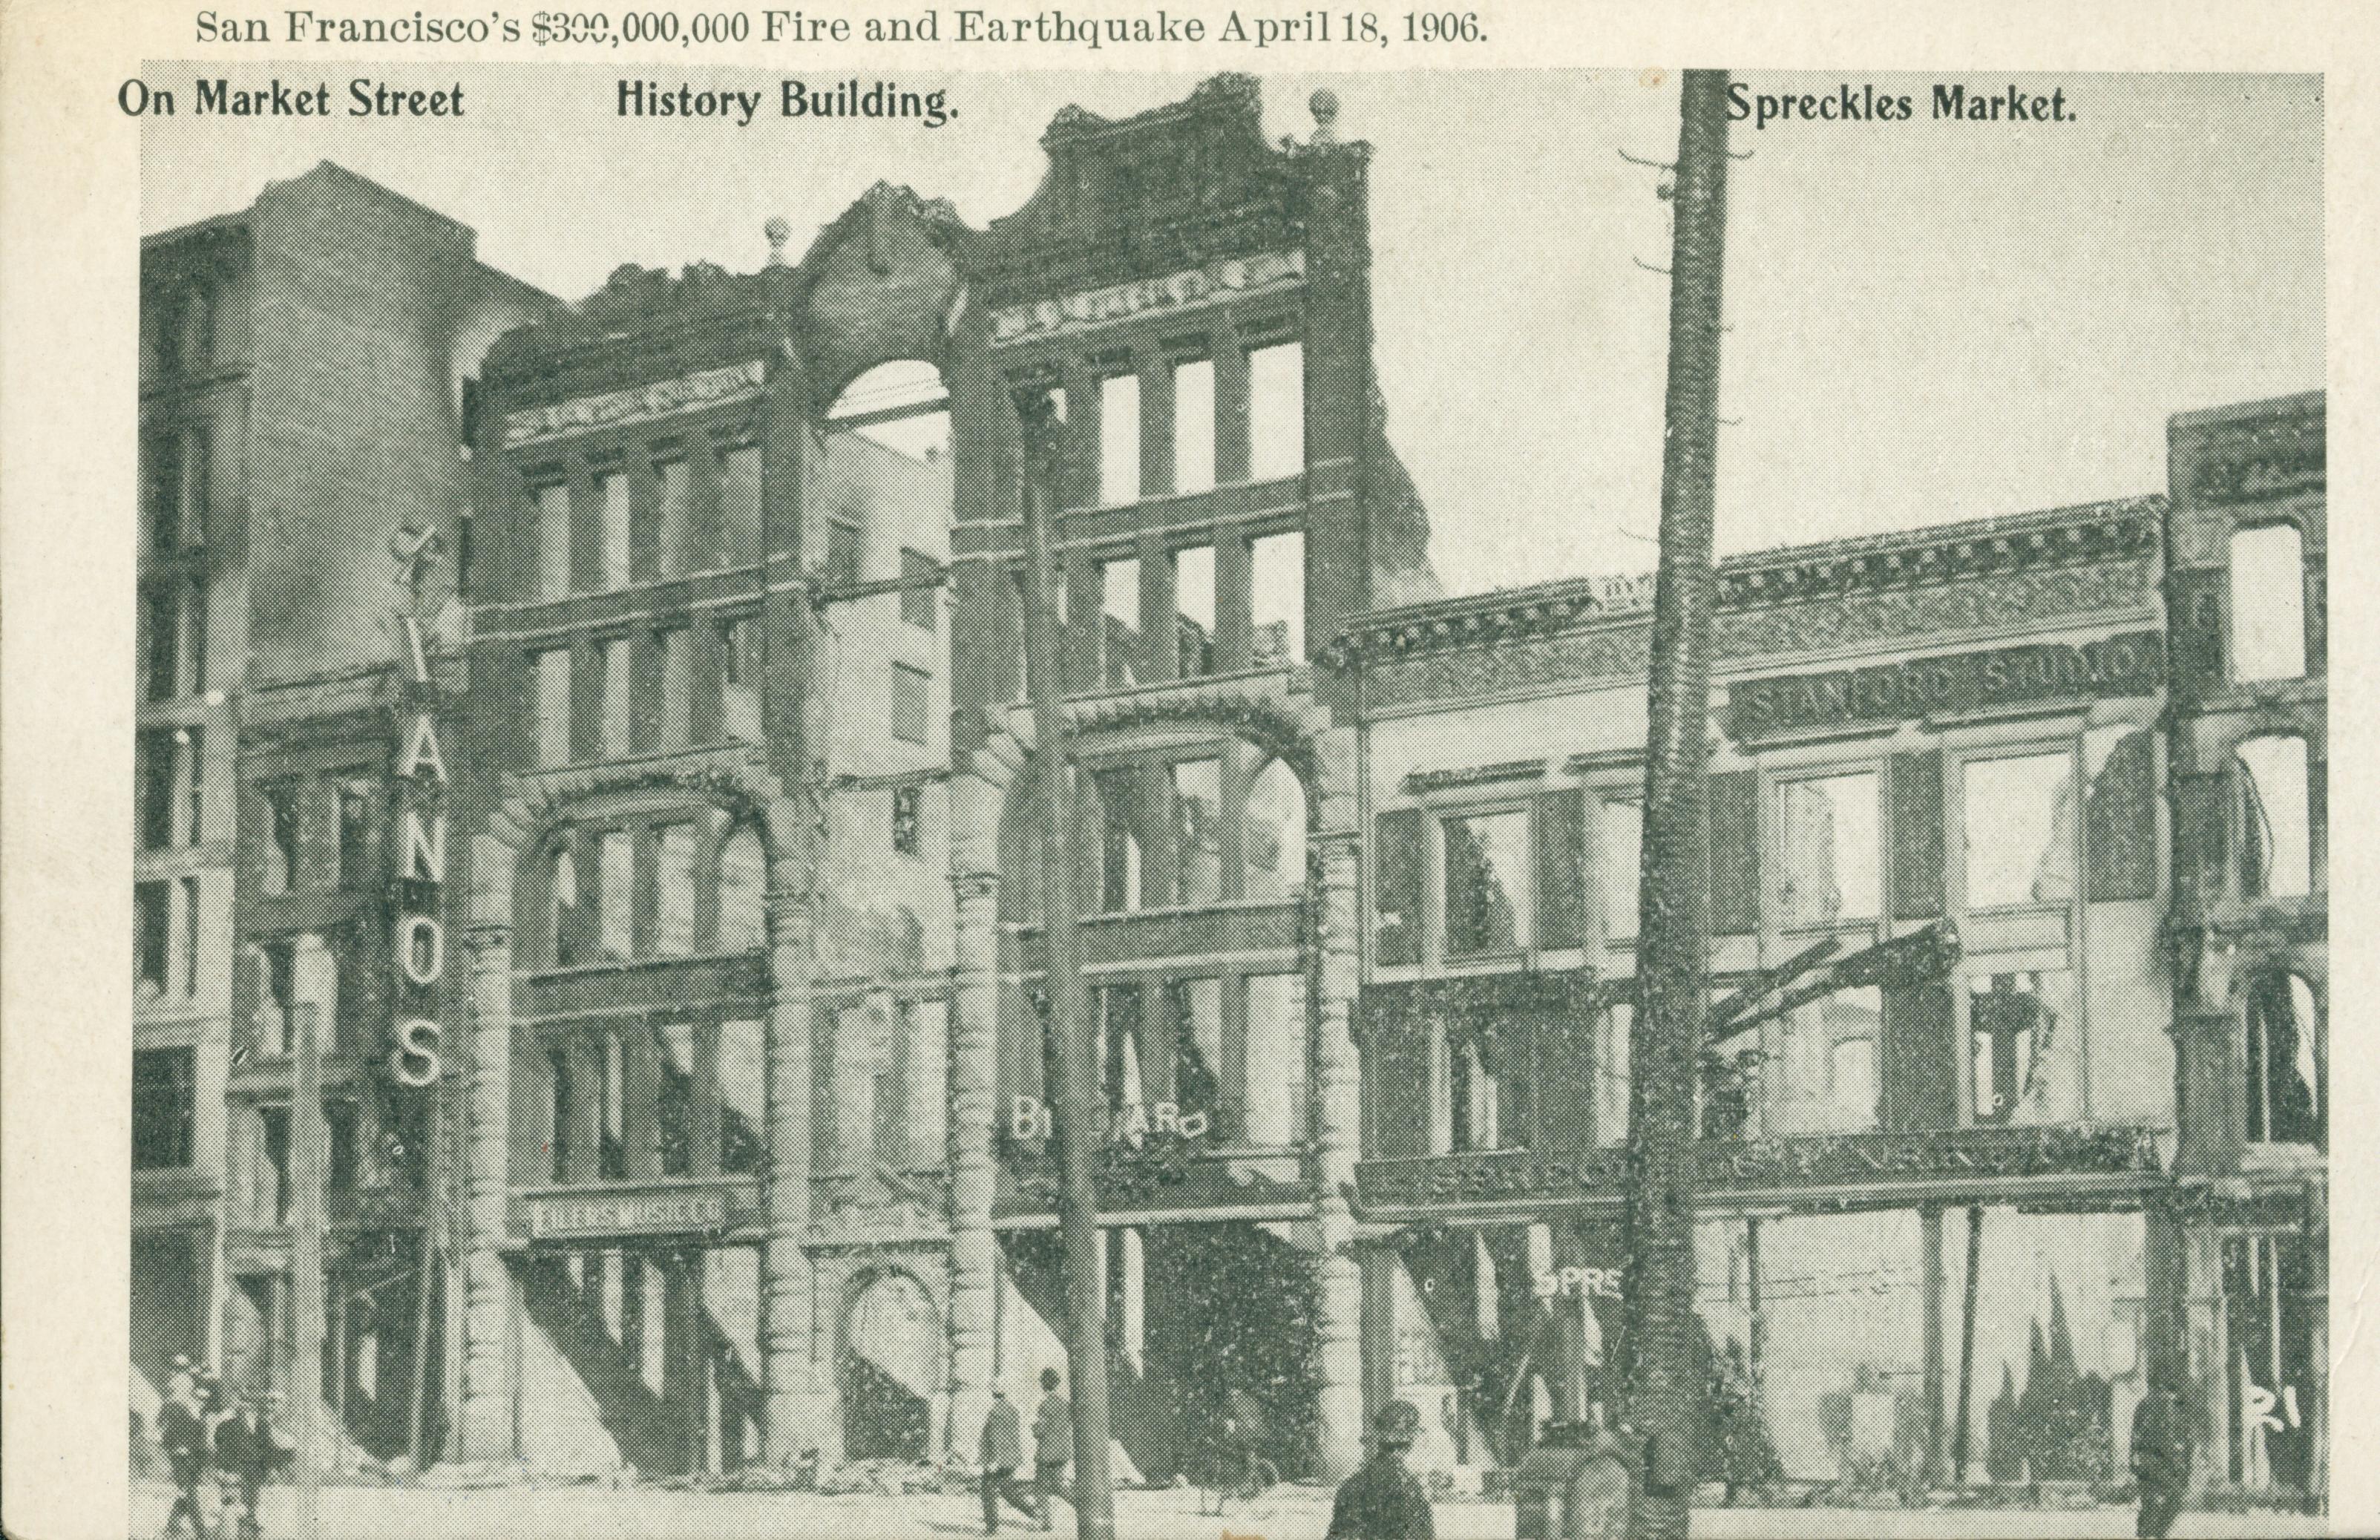 Shows  the ruins of several buildings on Market Street after the Earthquake